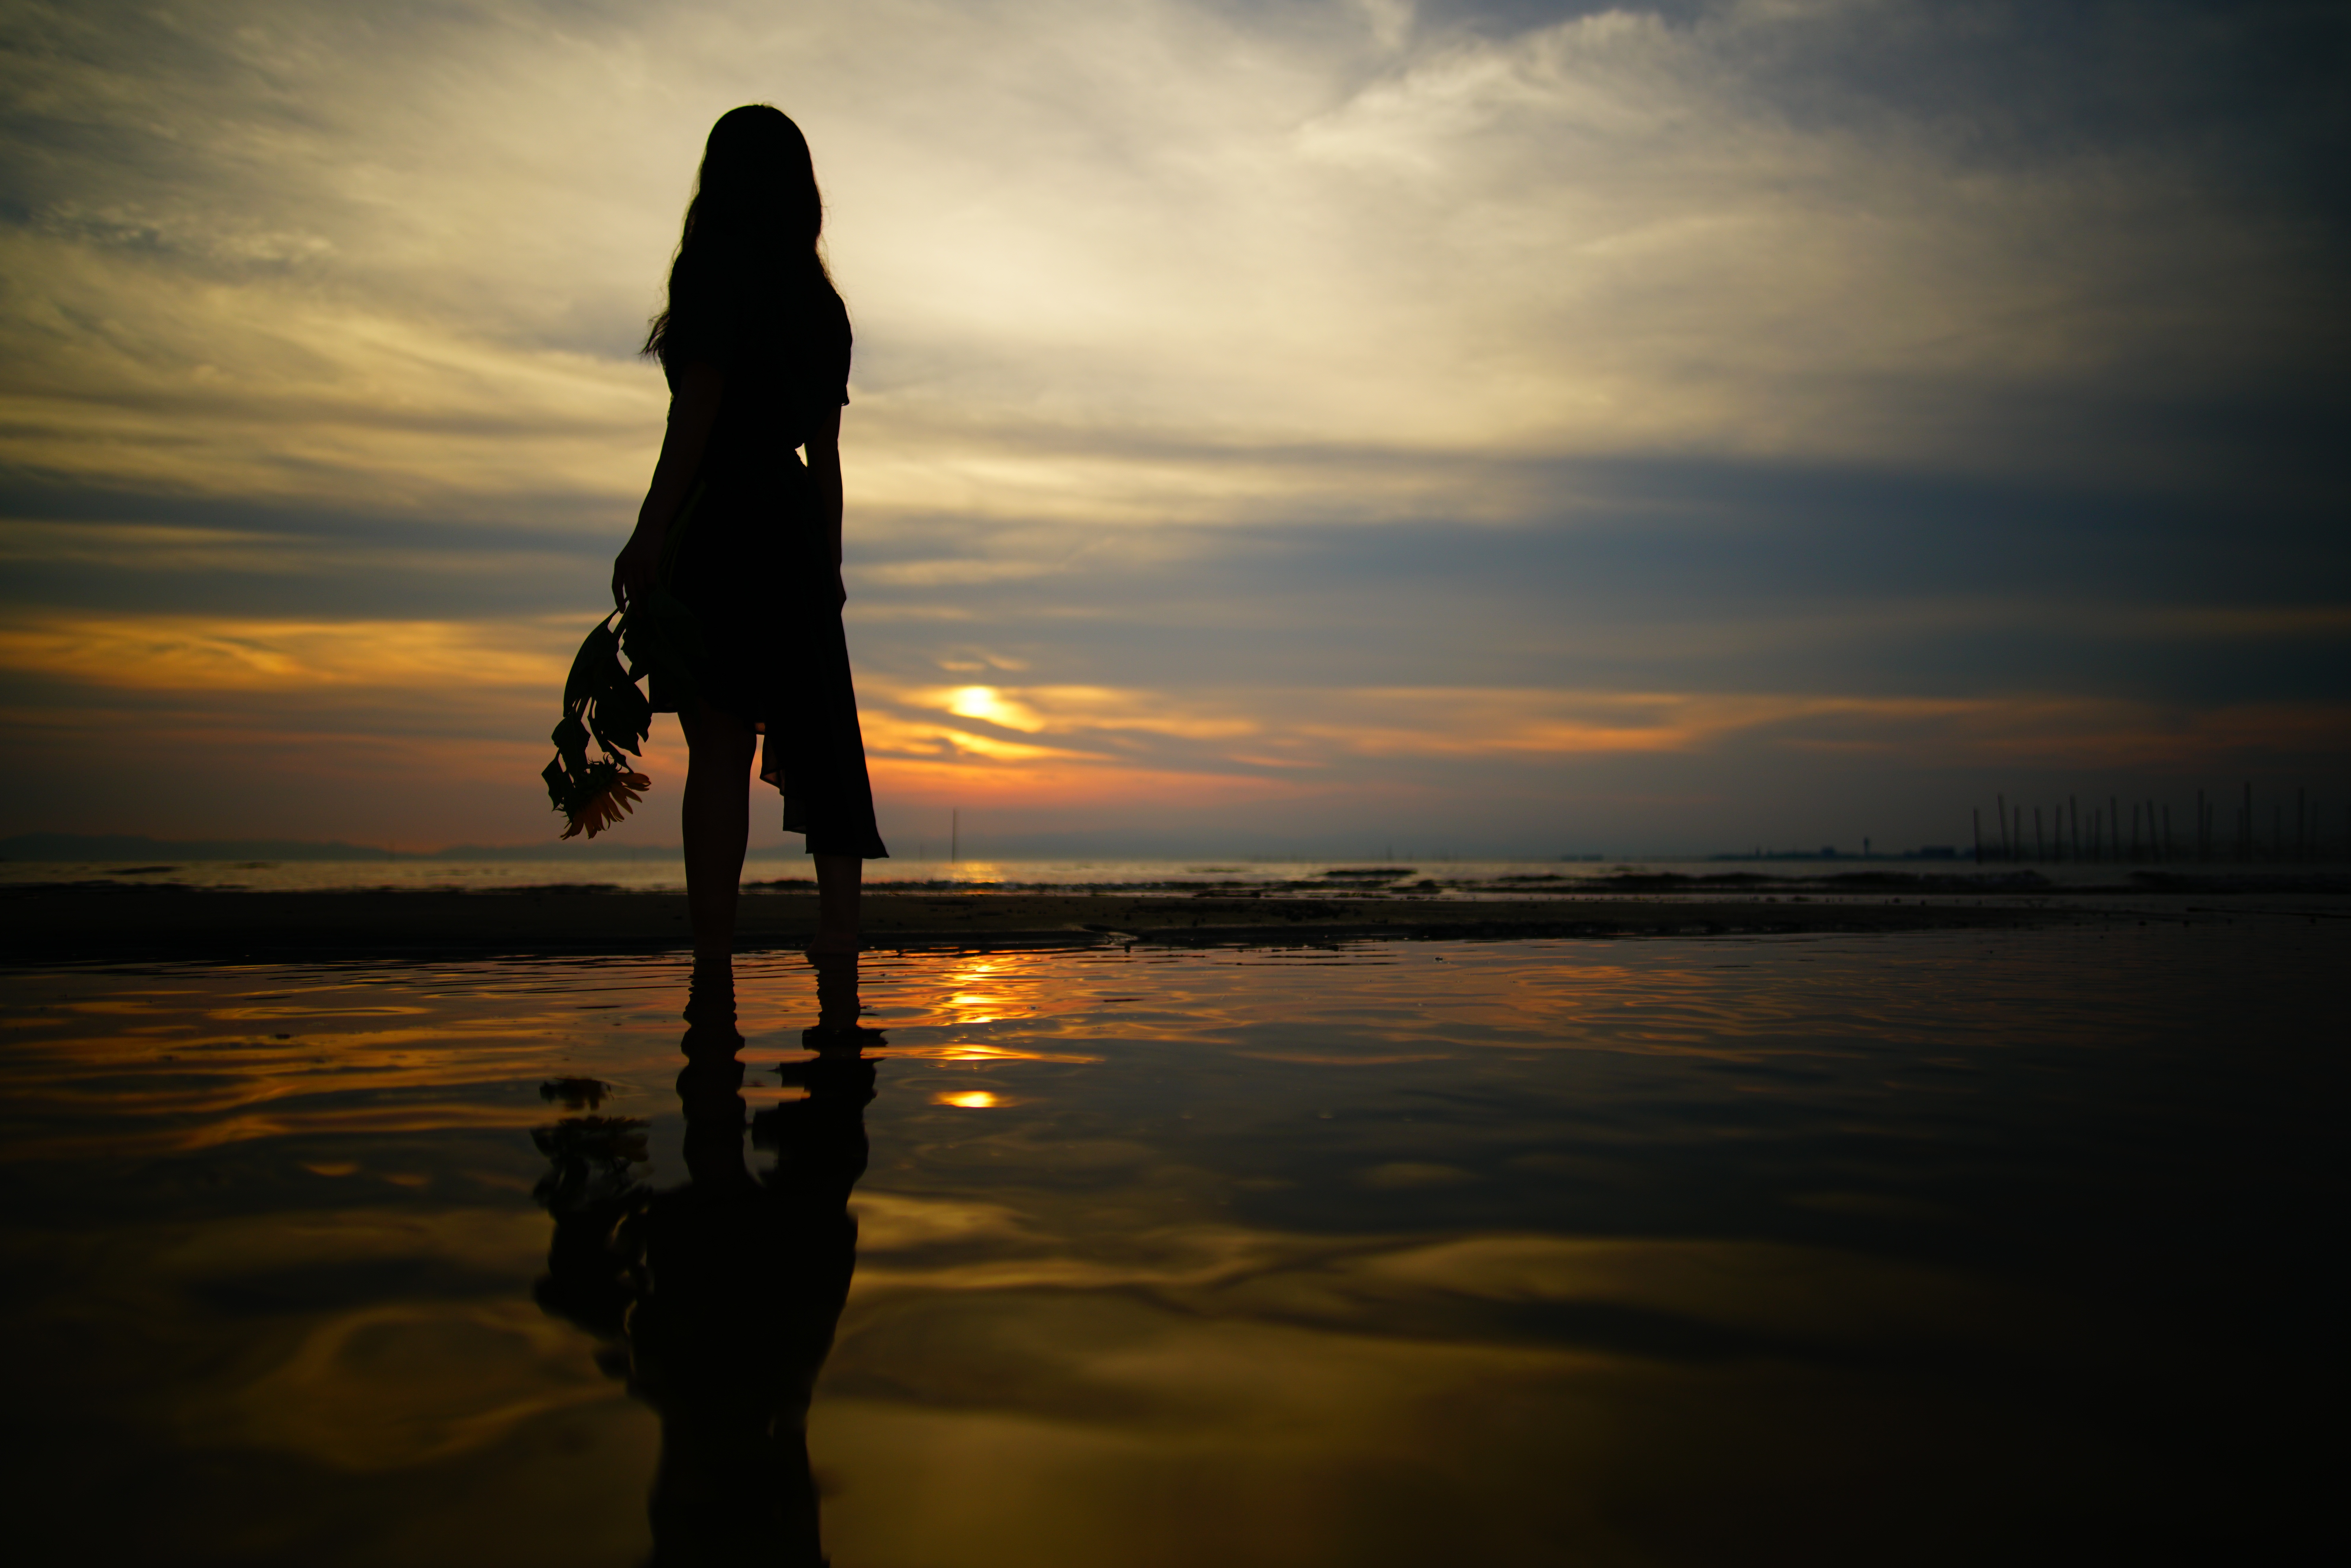 Girl Rear Reflection Silhouette Sunset Woman 7952x5304